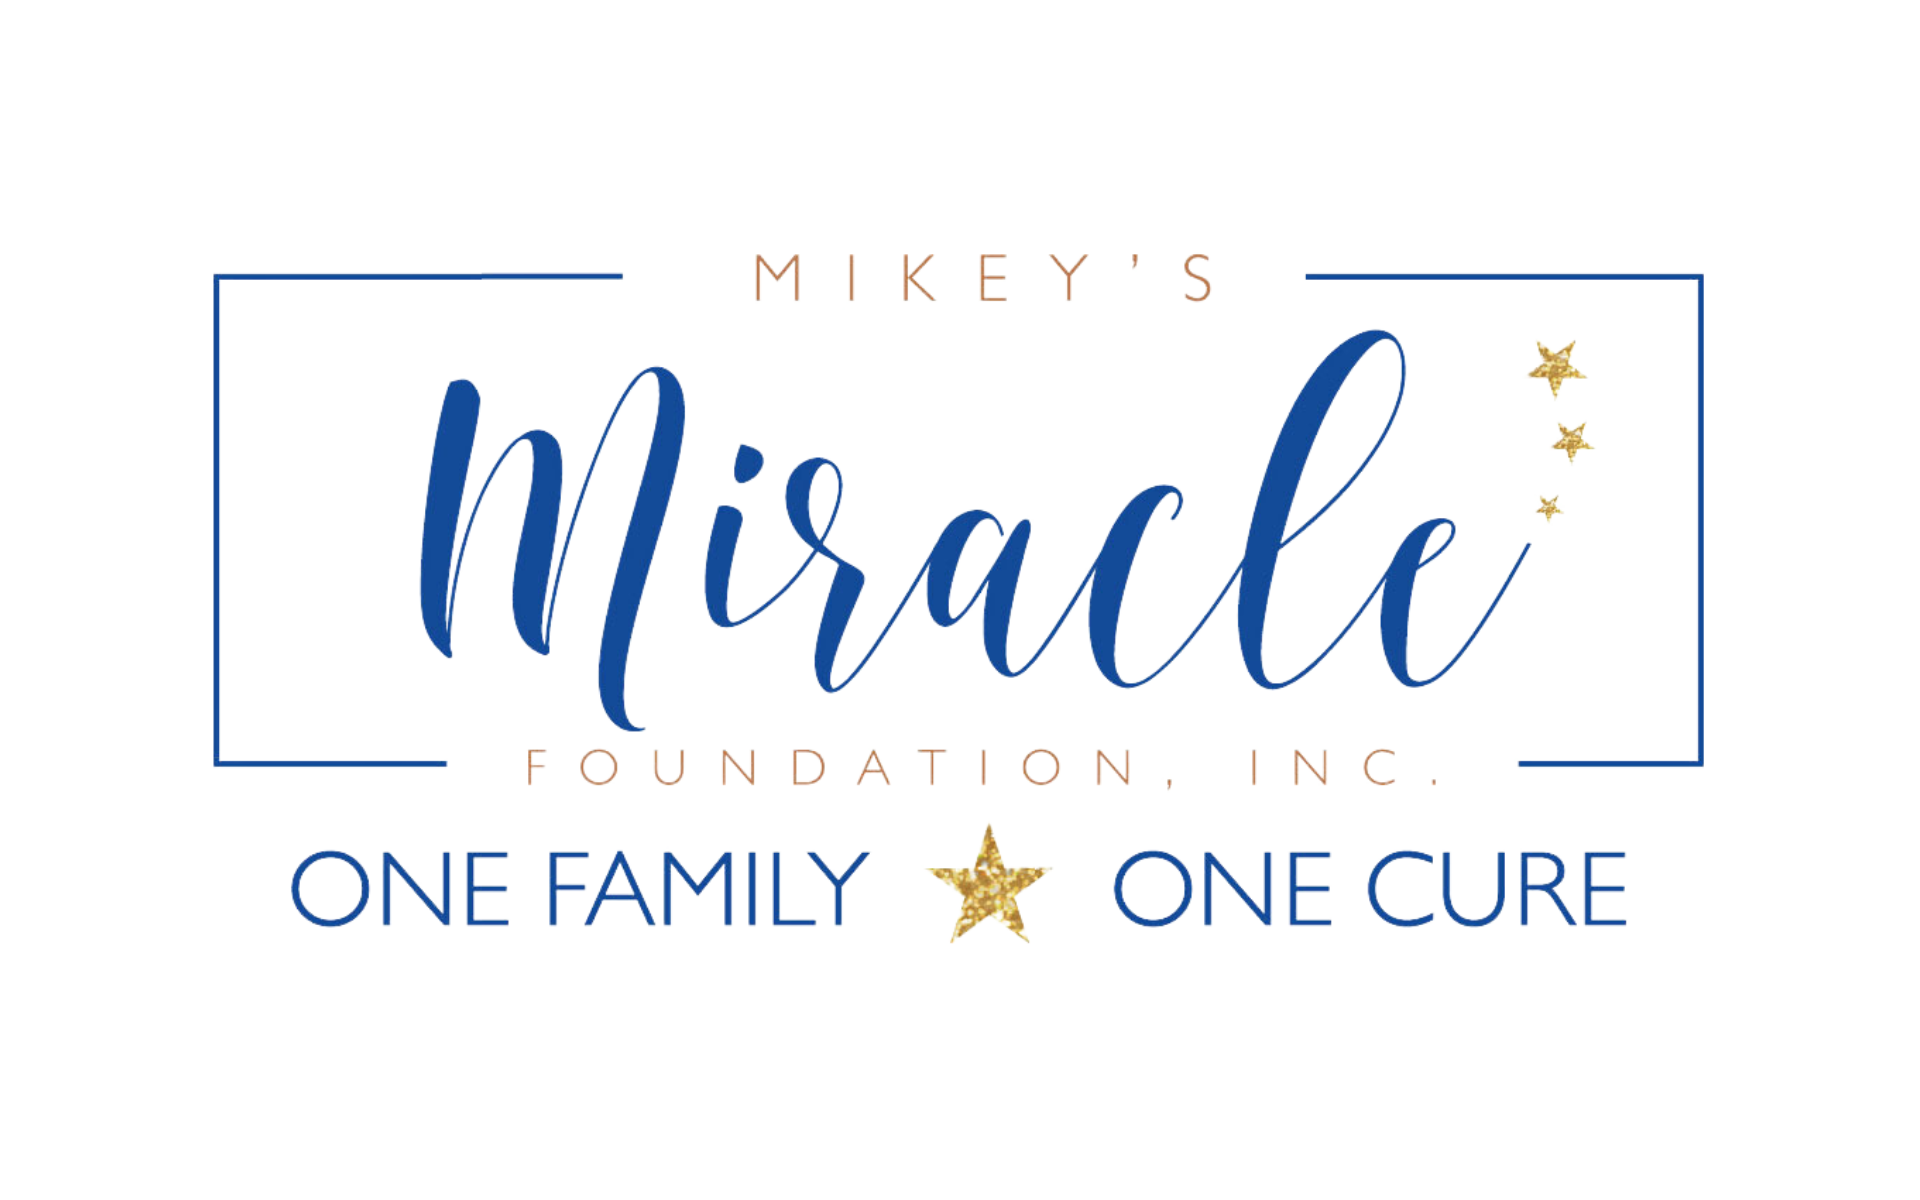 Mikey’s Miracle Foundation